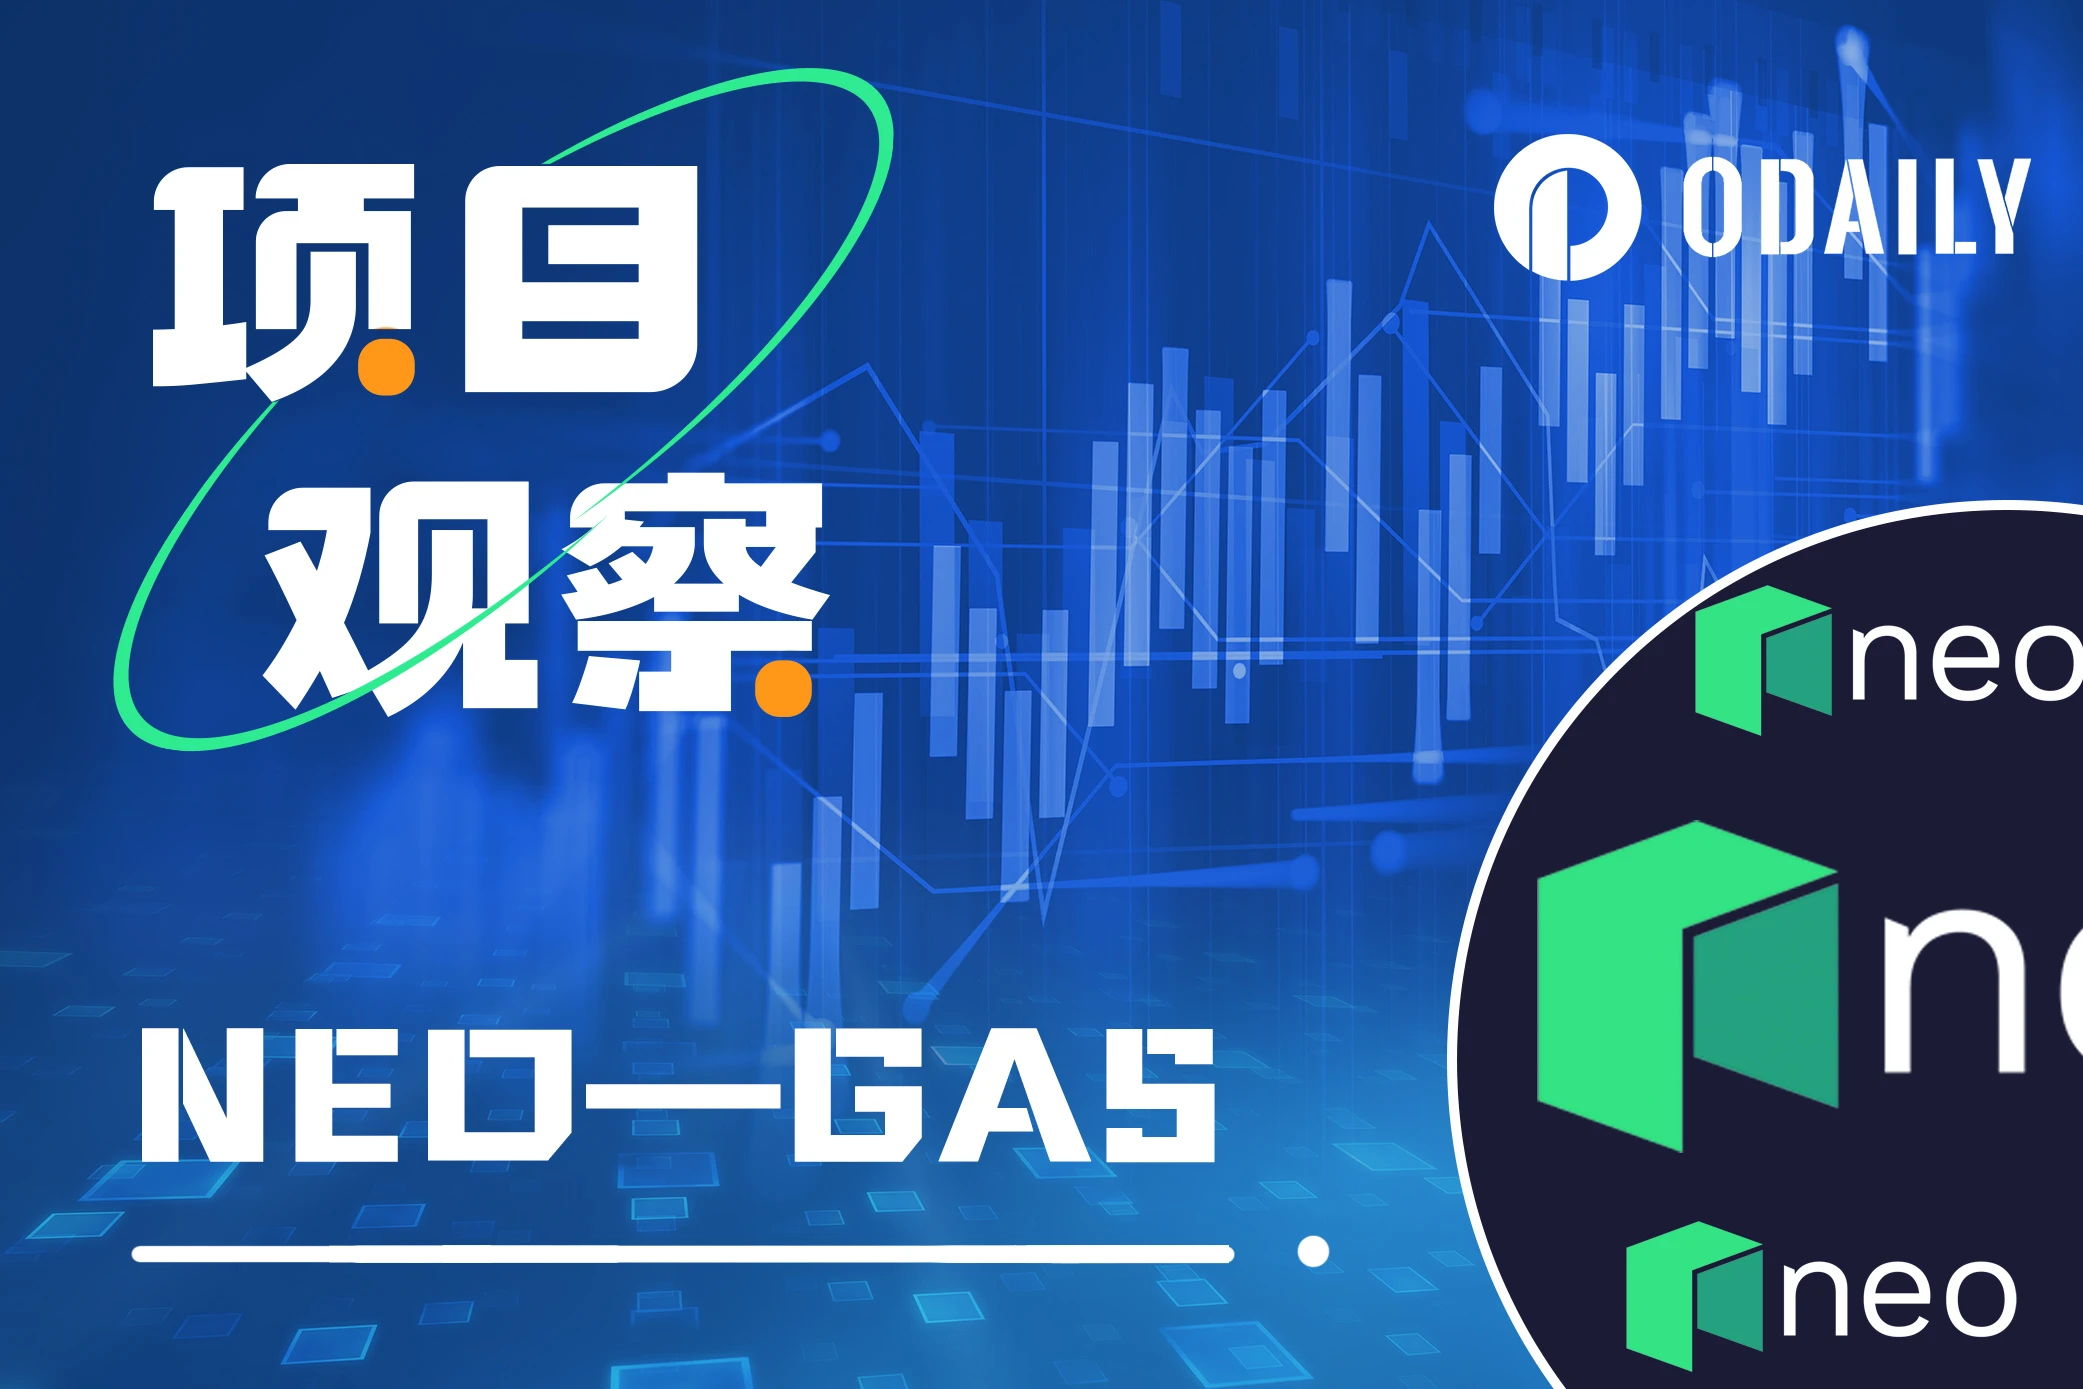 Weekly increase nearly 3 times, interpretation of the underlying mechanism of GAS token and public chain NEO